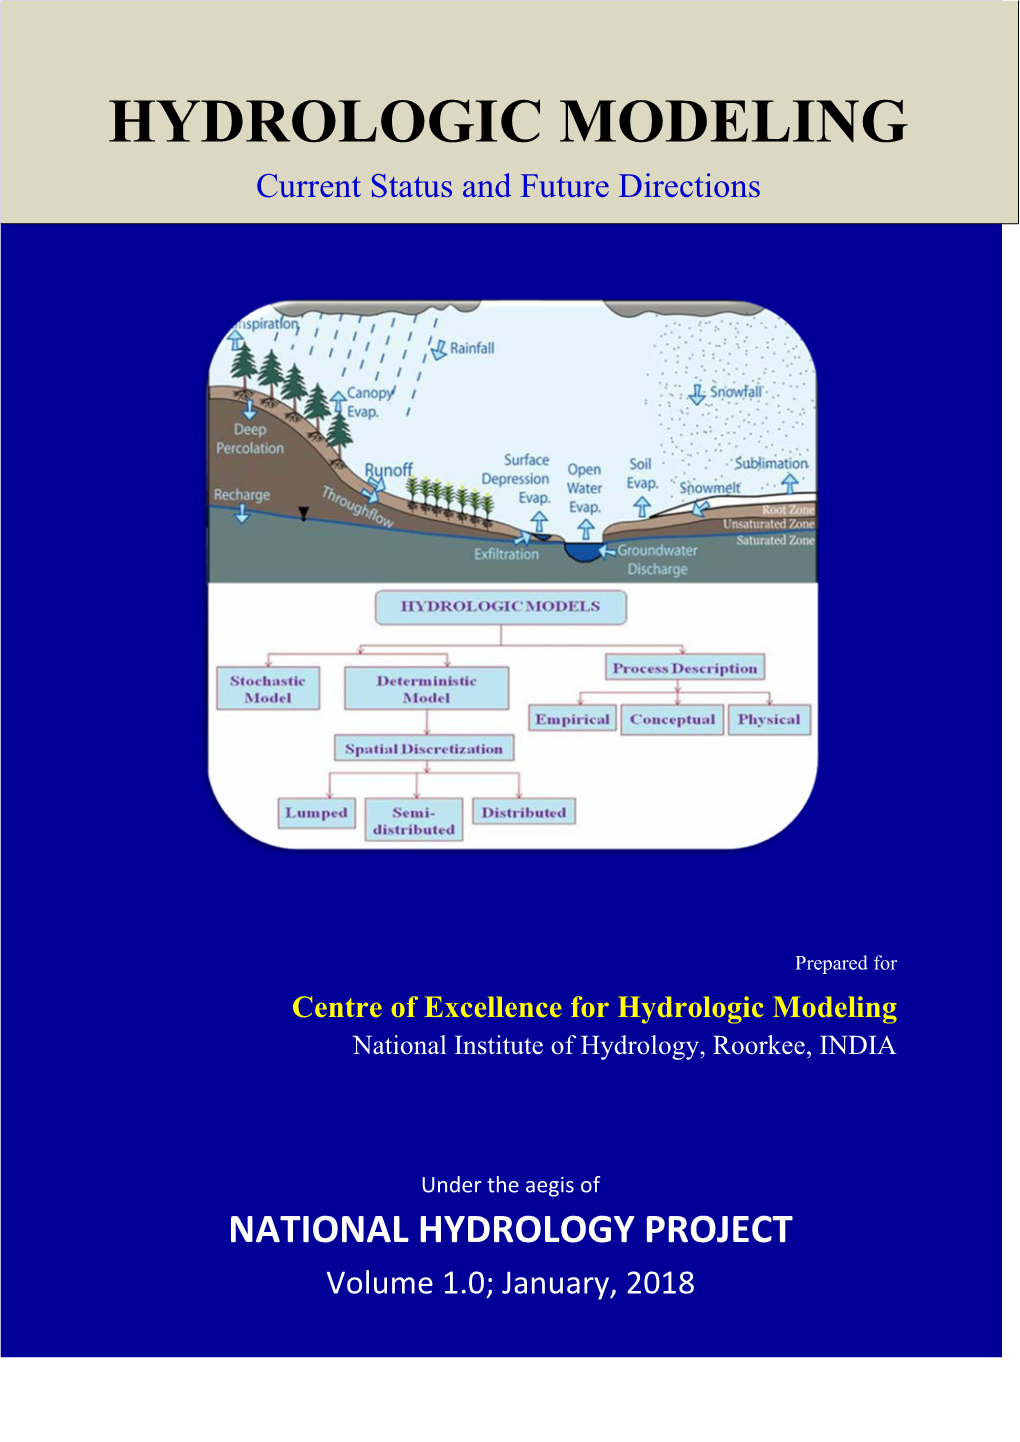 Hydrologic Modeling National Institute of Hydrology, Roorkee, INDIA